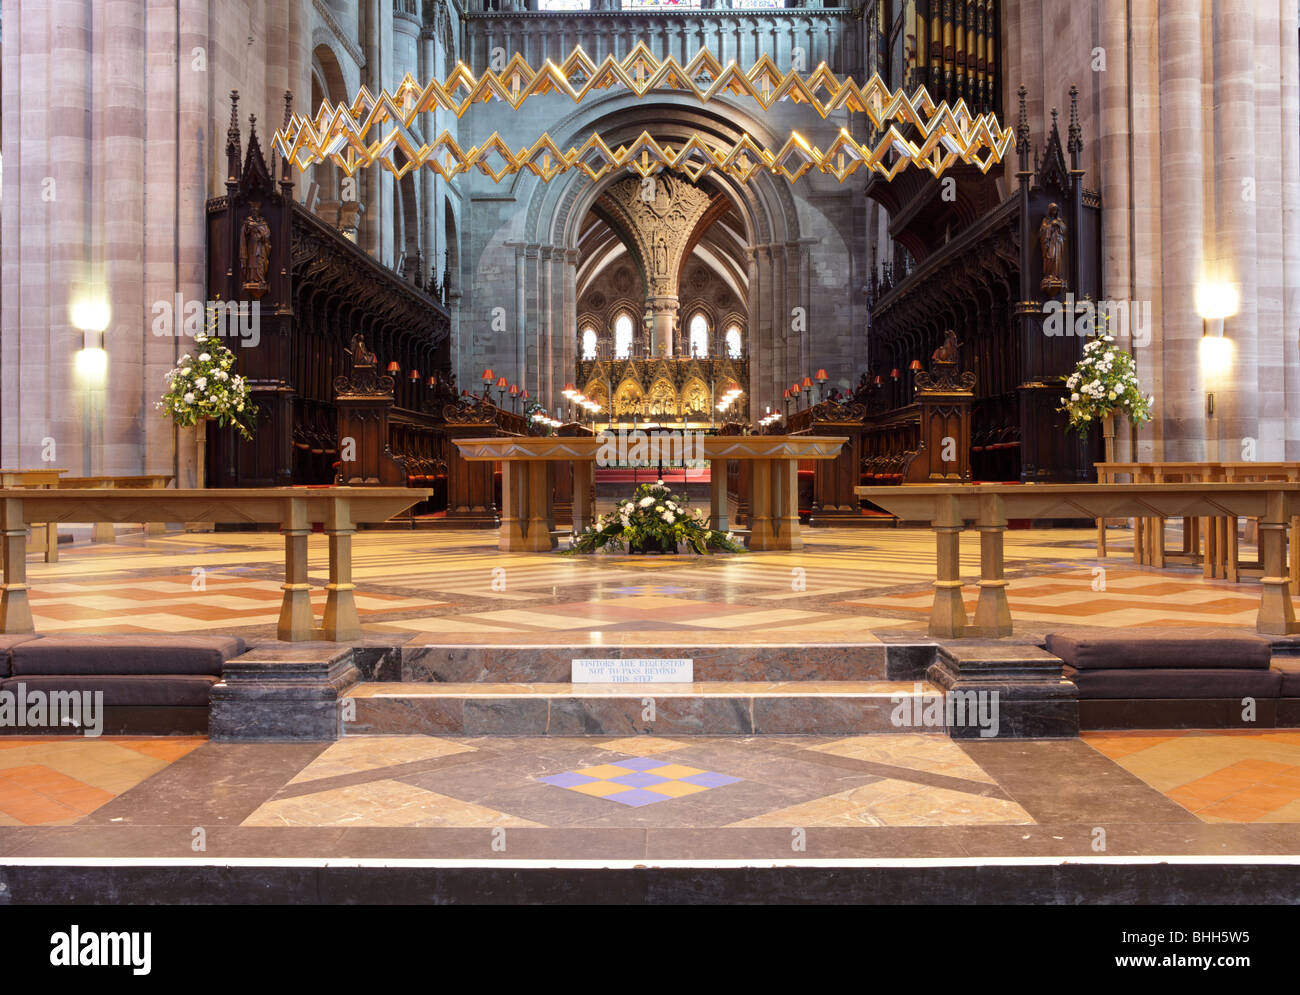 In my opinion this work by Simon Beer adds a majestic almost regal atmosphere to Hereford Cathedral. Stock Photo